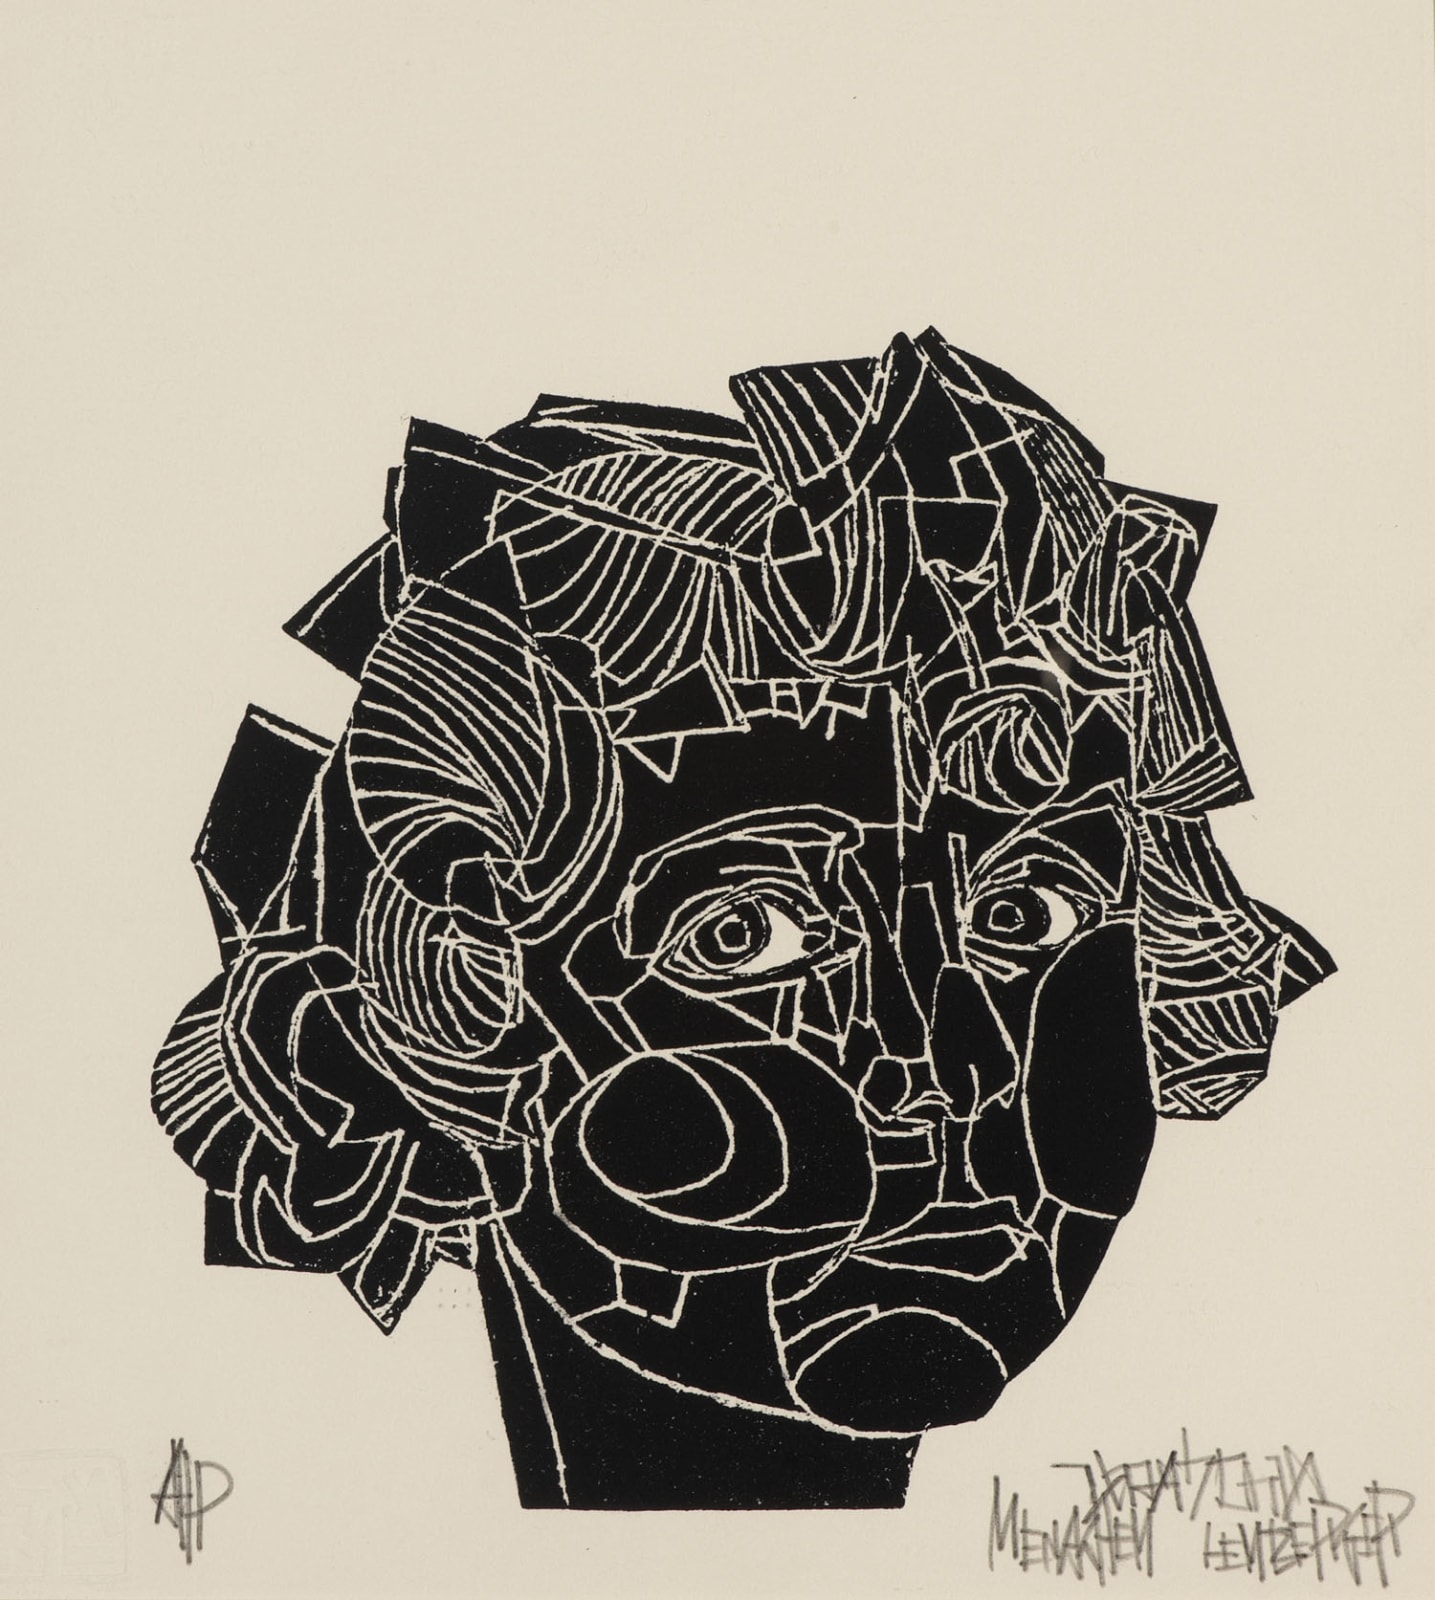 Menachem Lemberger (1938-1992) Head n.d. Woodcut on paper 26 x 23 cm Ben Uri Collection © Menachem Lemberger estate To see and discover more about this artist click here